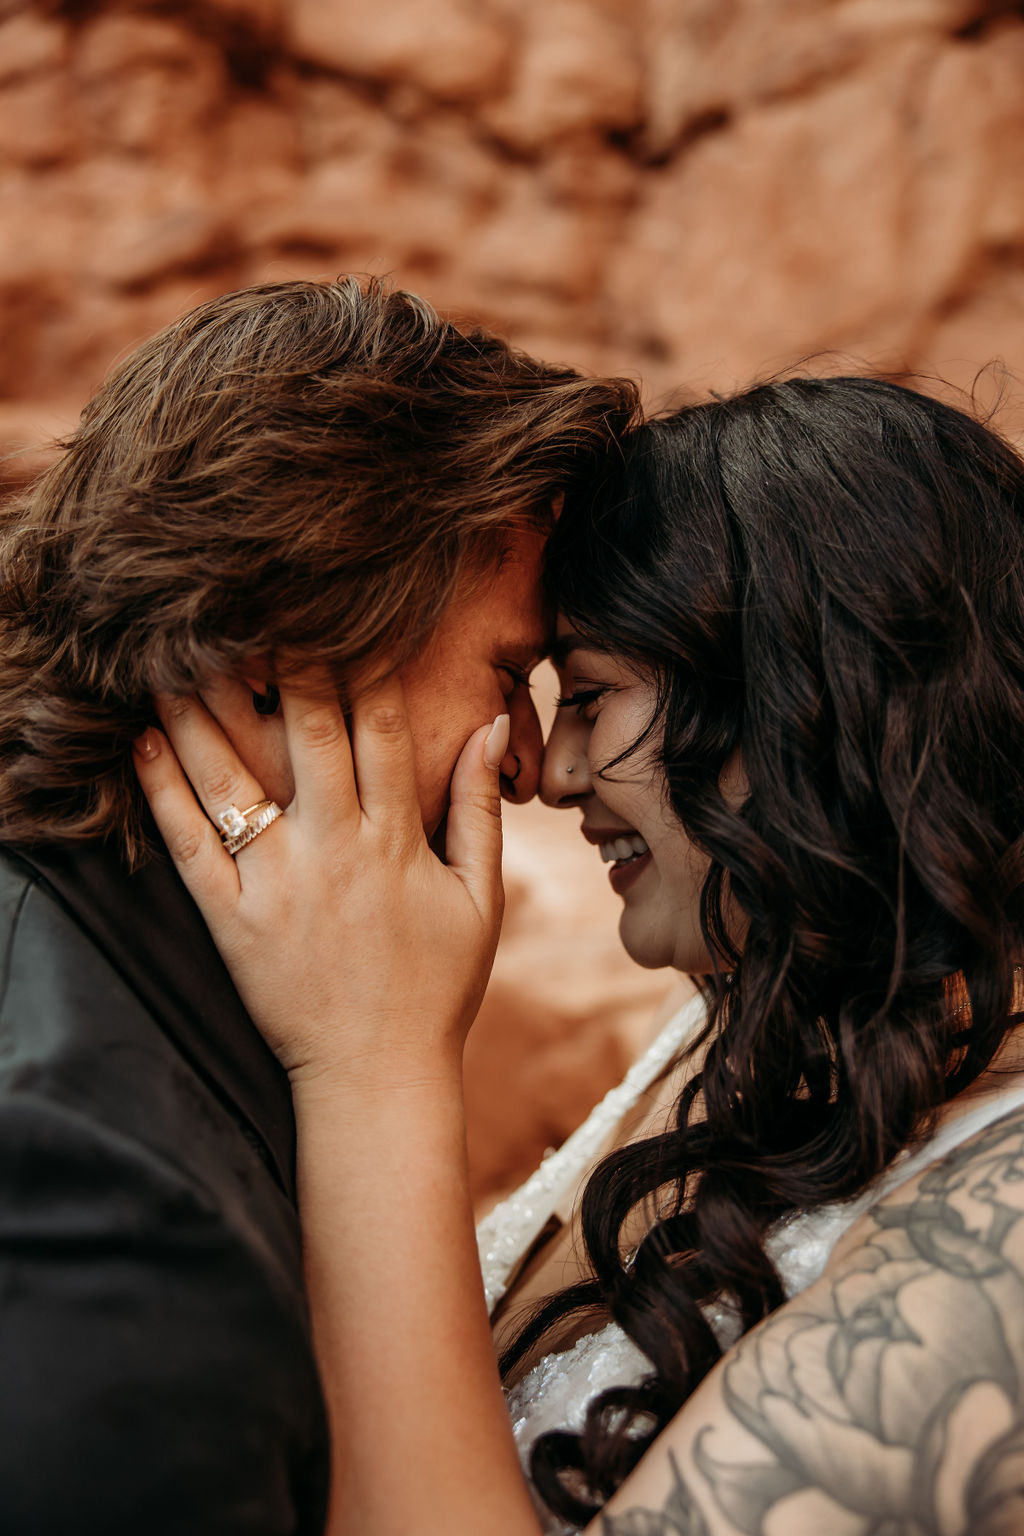 Intimate moment between two people with one gently holding the other's face, smiling closely with affection at Arches National Park